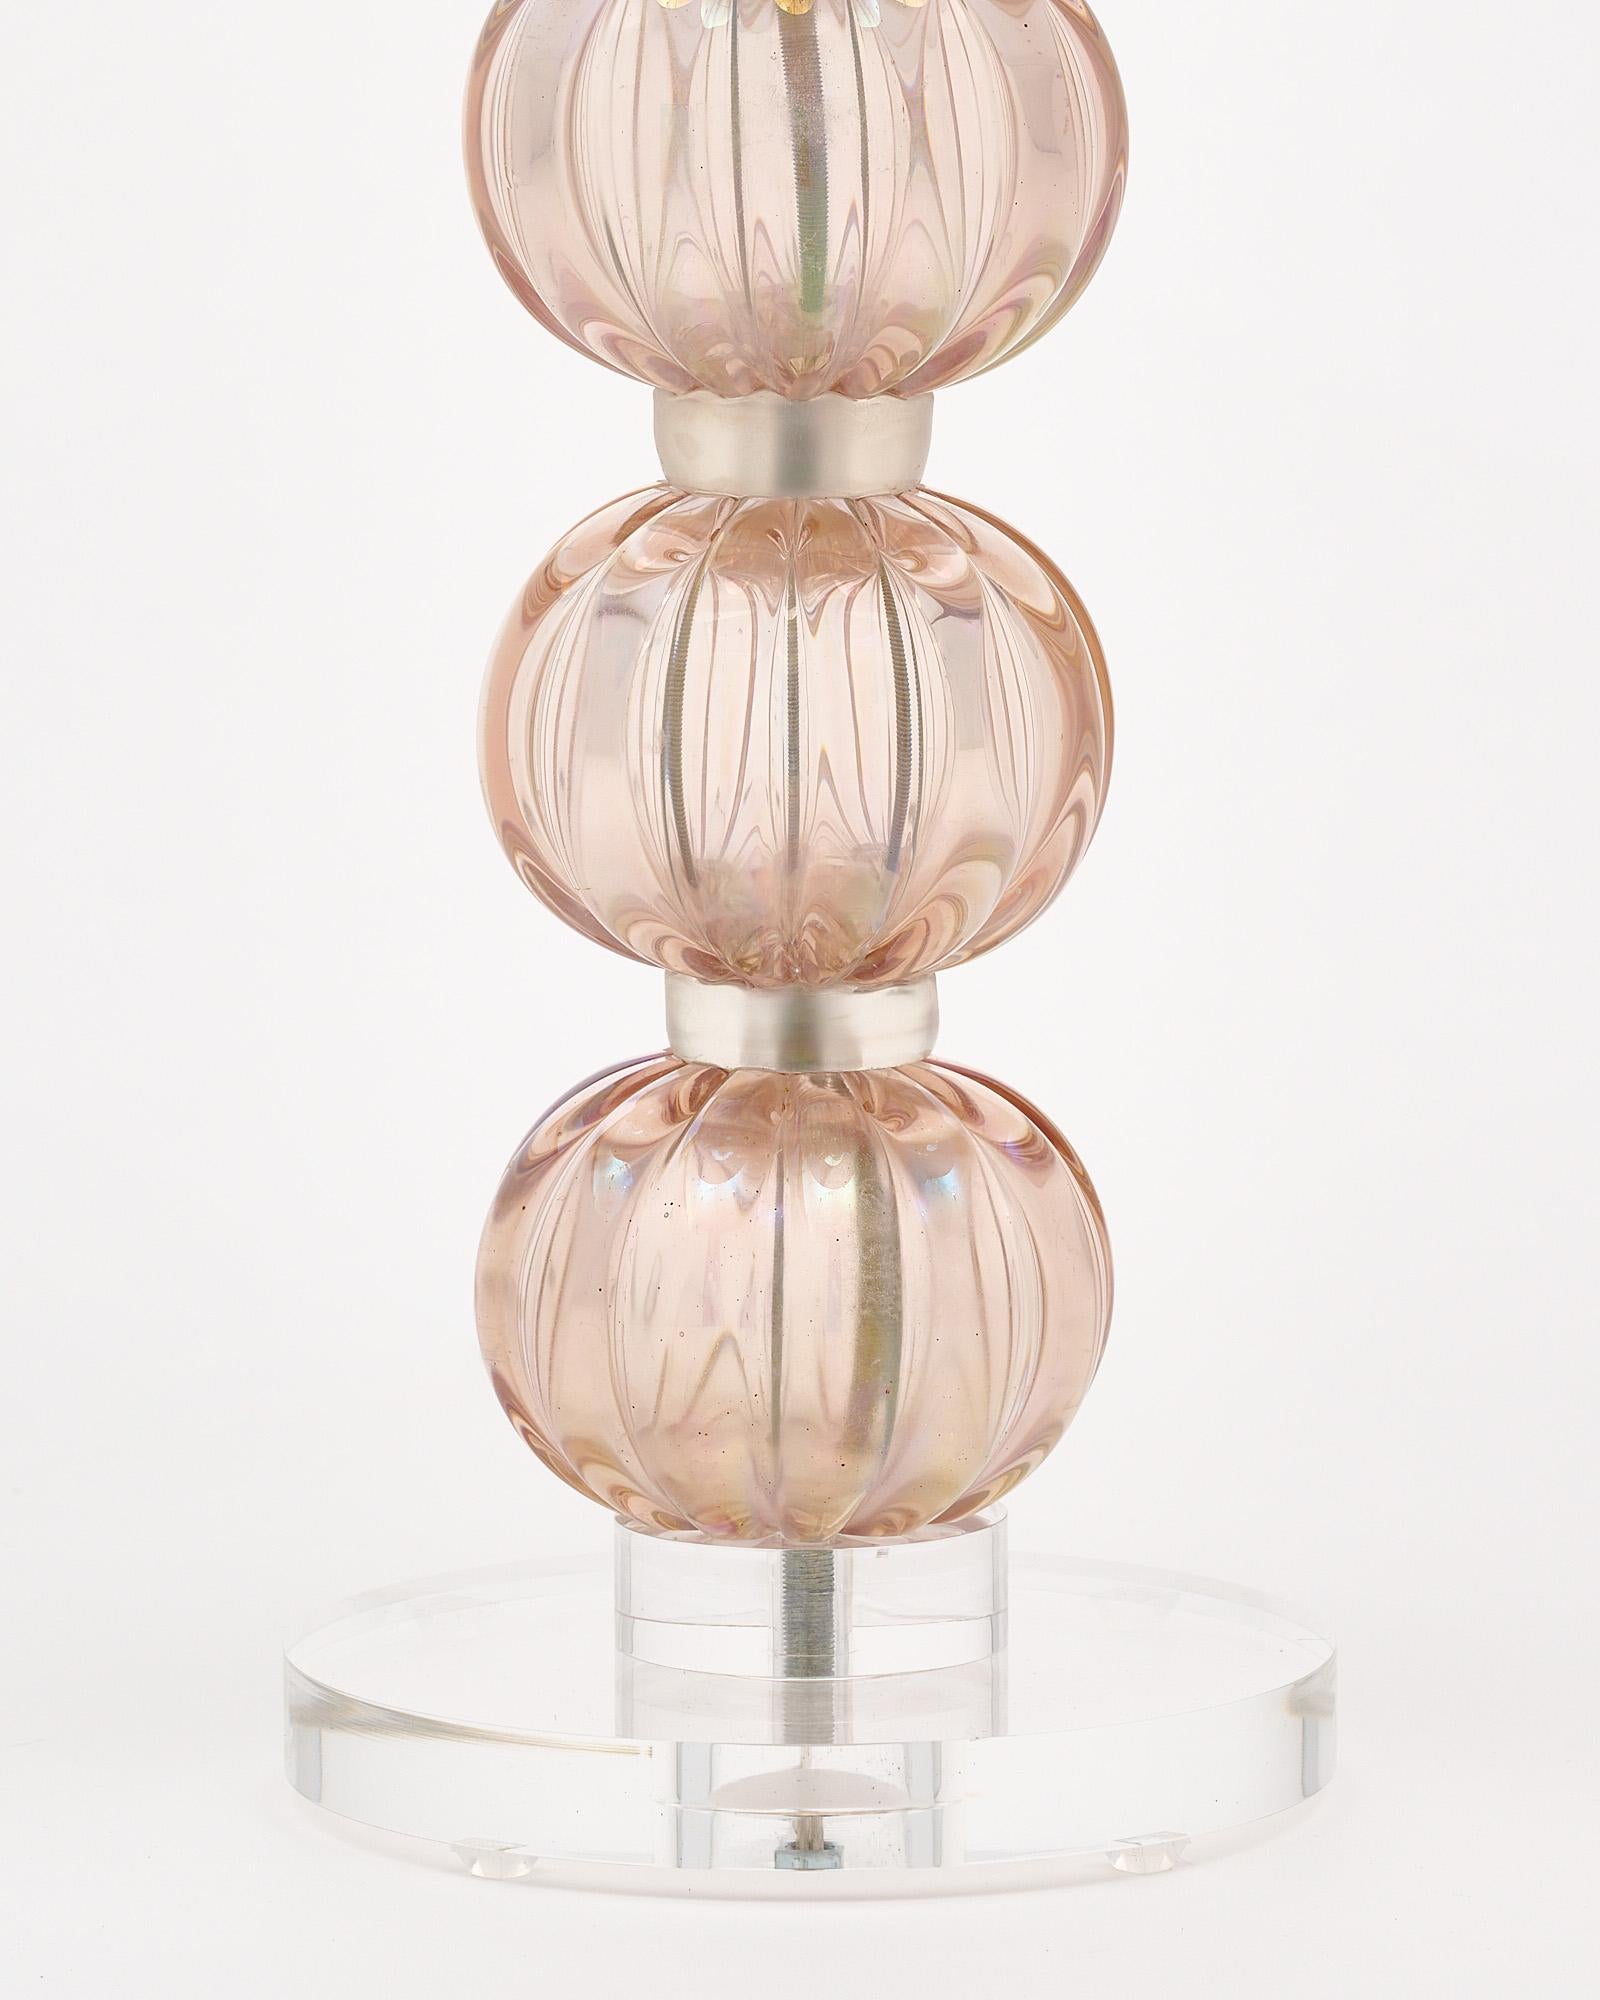 Single lamp from Murano, Italy made of hand-blown iridescent glass in a light pink color. The glass sits atop a Lucite base. It has been newly wired to fit US standards.